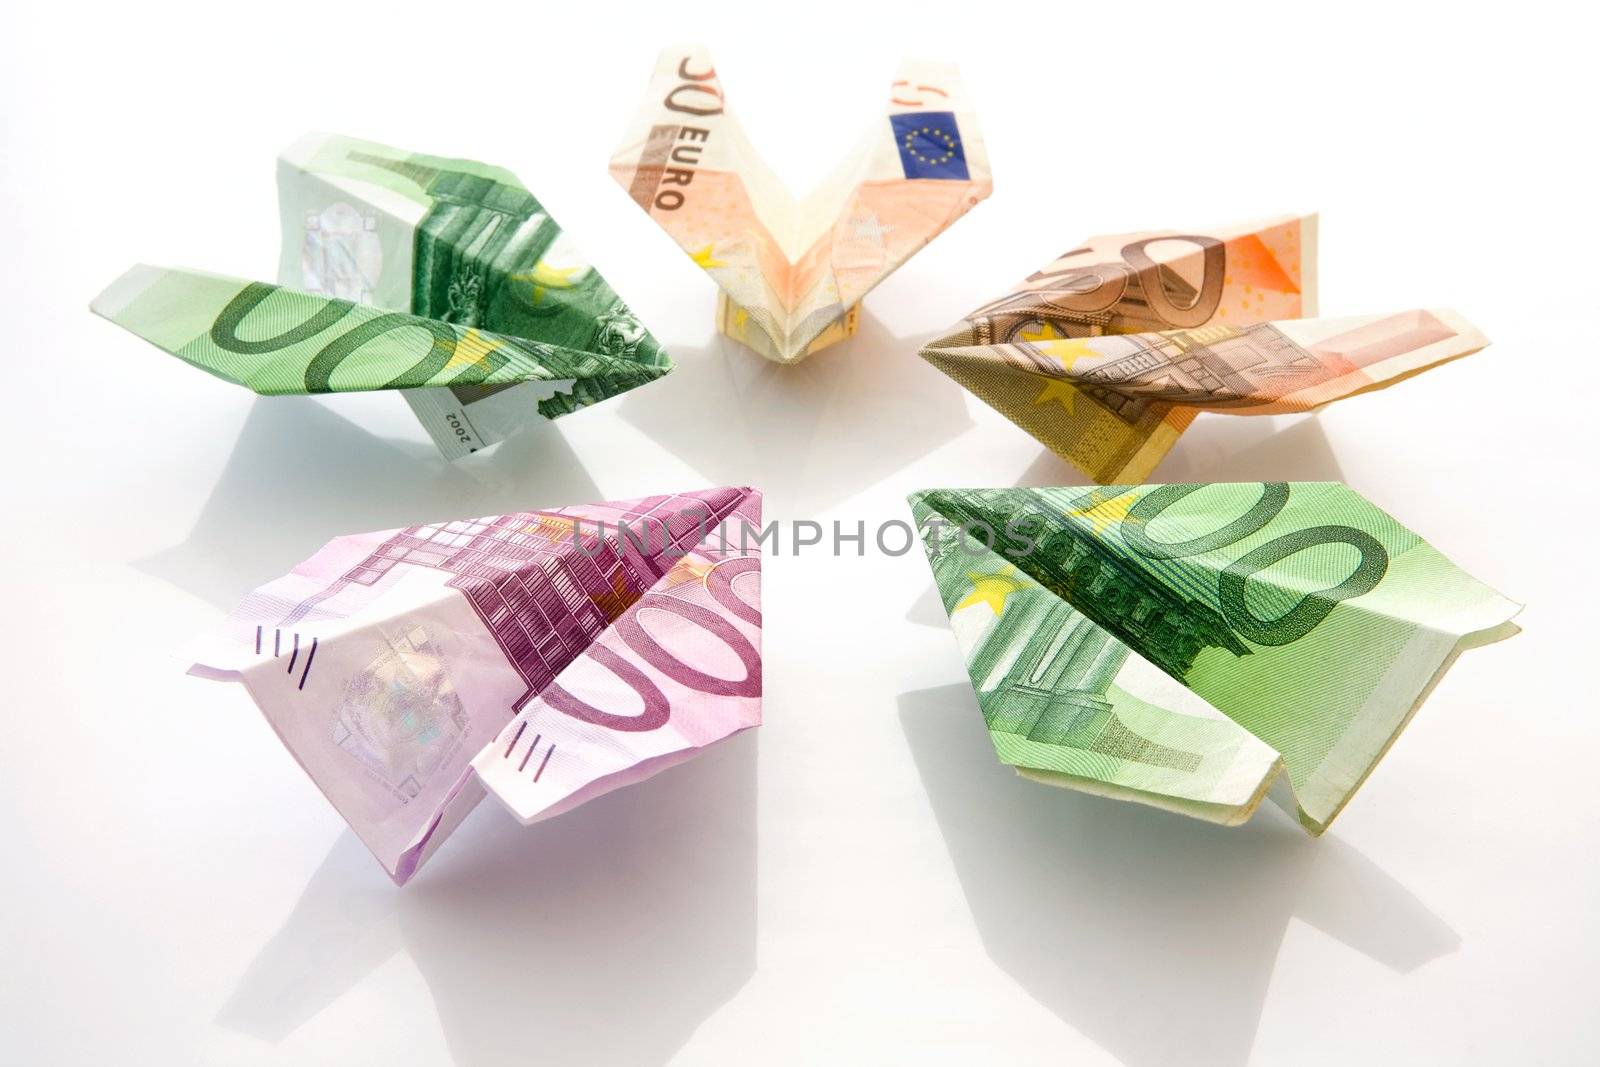 The planes made of  euro